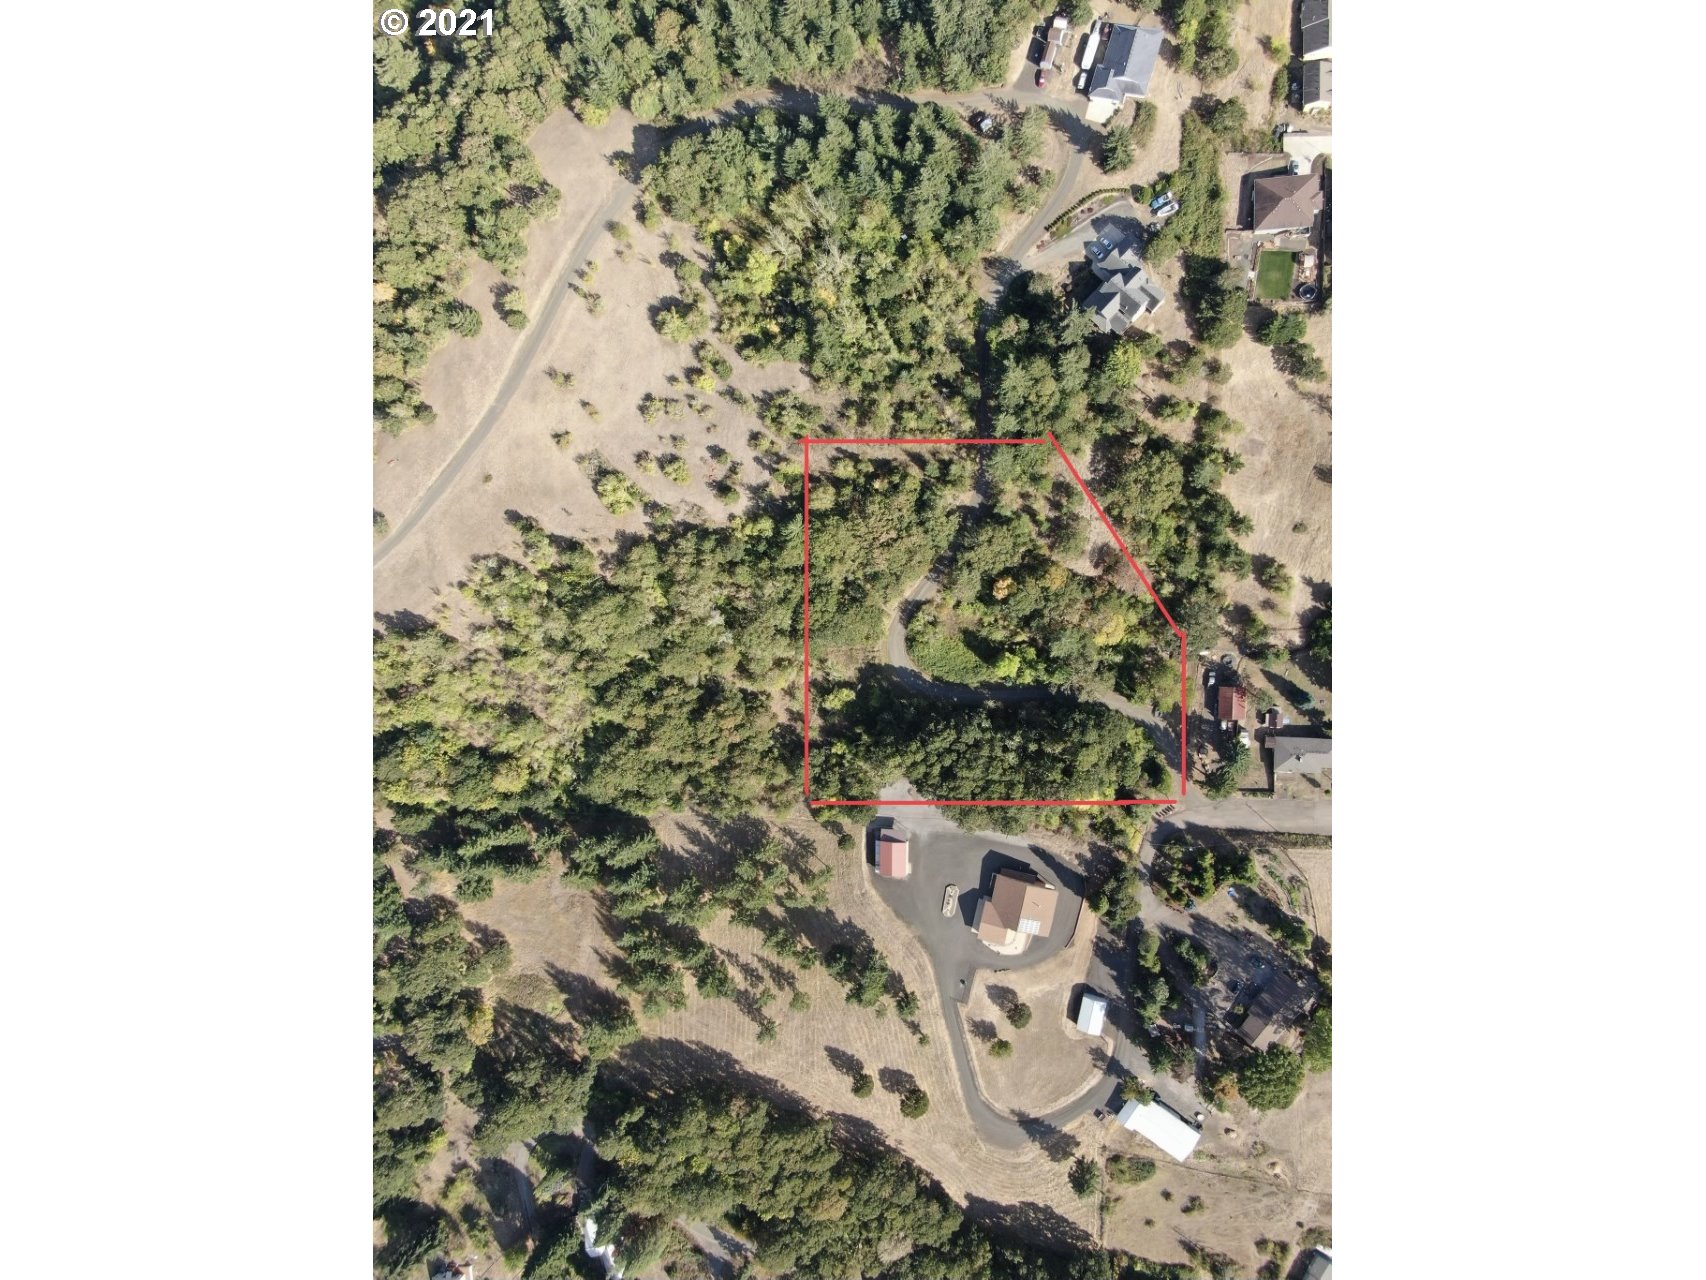 Approximate Property Lines-Aerial